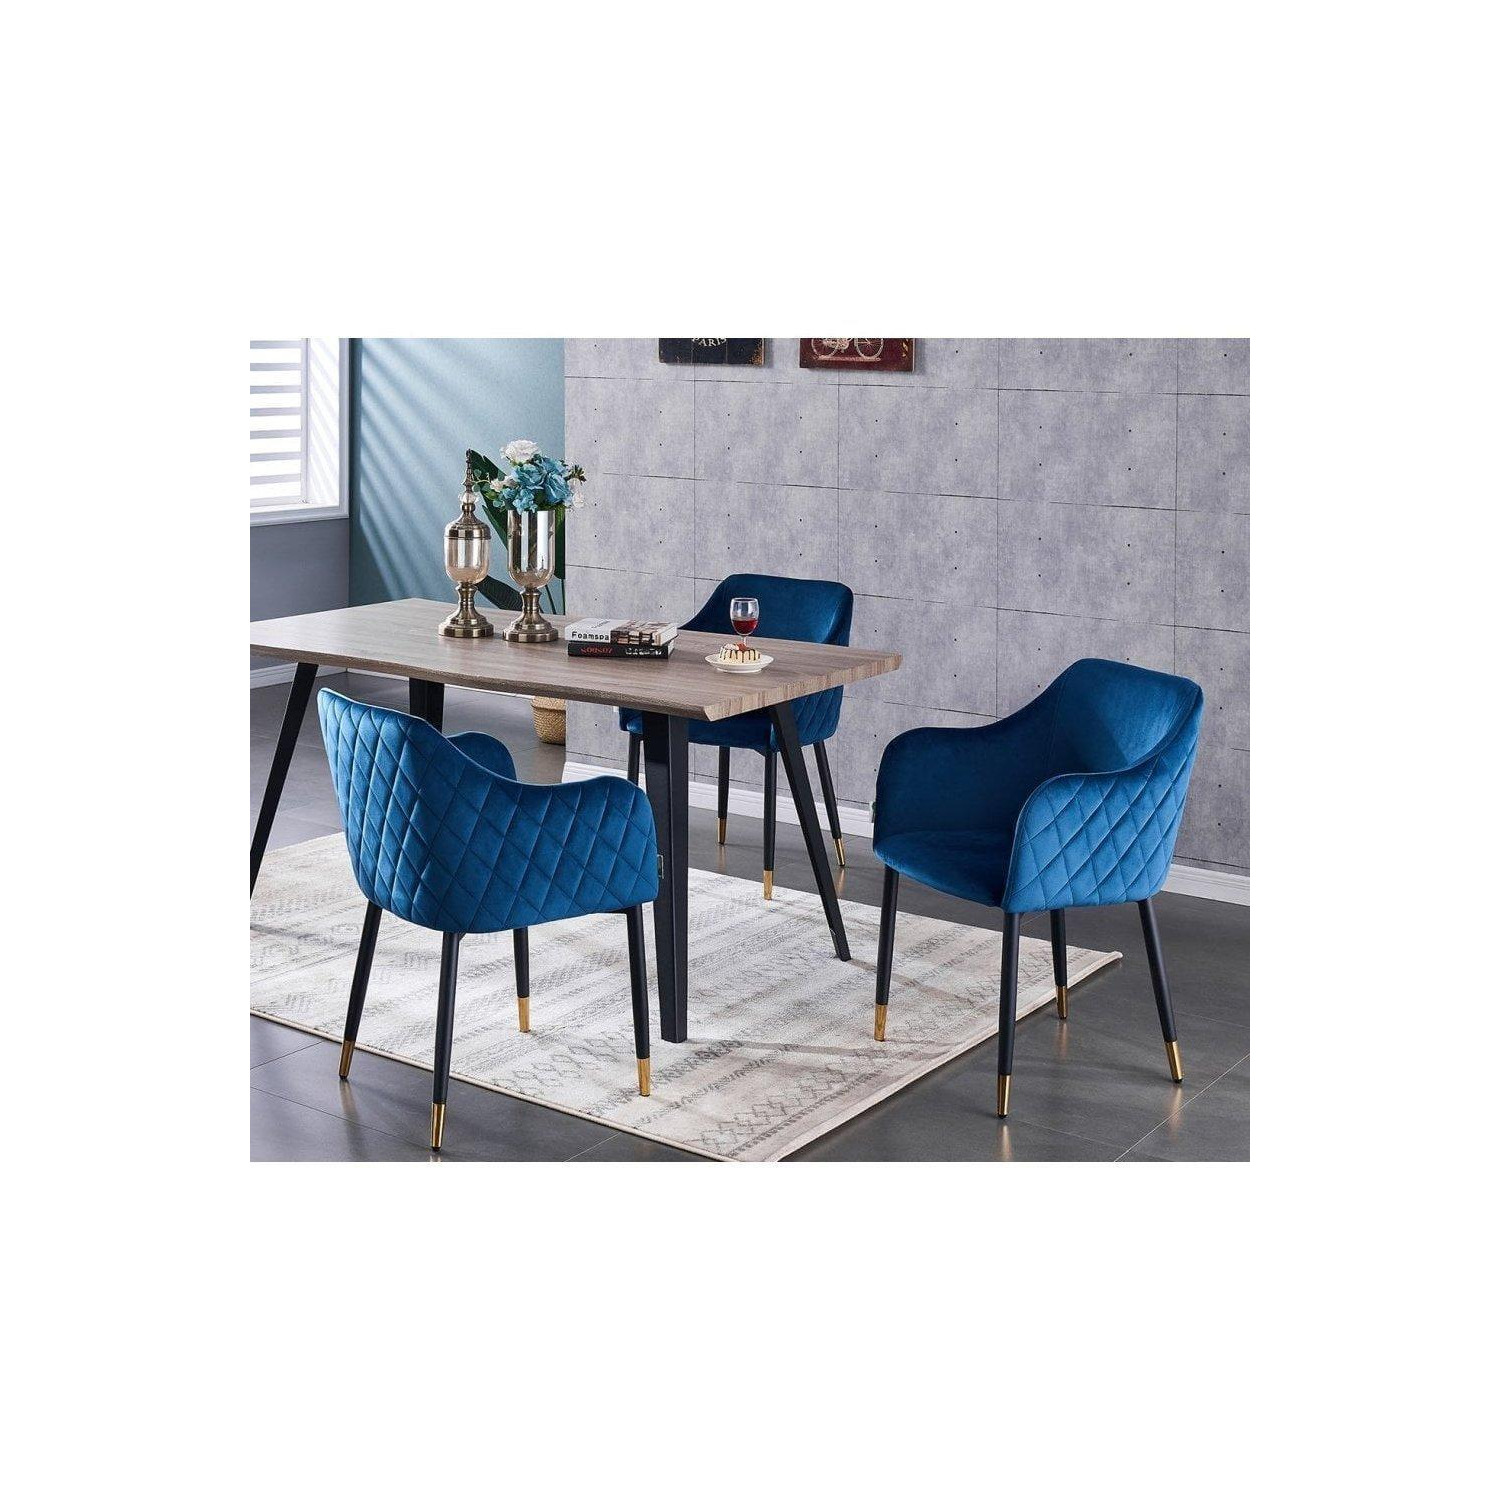 'Verona Rocco' LUX Dining Set with a Table and 4 Velvet Chairs - image 1